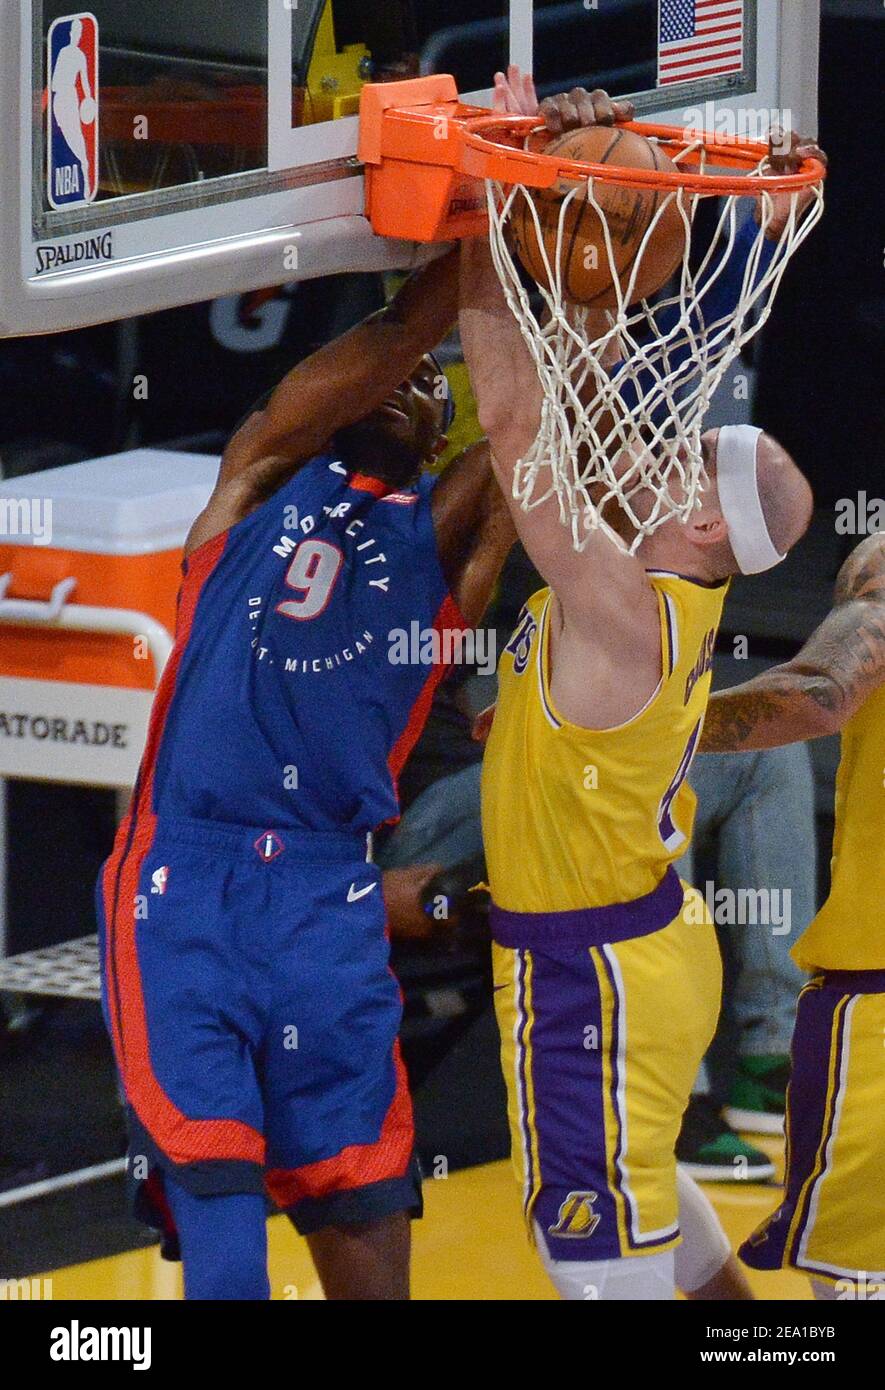 Los Angeles, United States. 06th Feb, 2021. Detroit Pistons' forward Jerami Grant jams over Los Angeles Lakers' guard Alex Caruso during the third quarter at Staples Center in Los Angeles on Saturday, February 6, 2021. The Lakers defeated the Pistons 135-129 in double-overtime. Photo by Jim Ruymen/UPI Credit: UPI/Alamy Live News Stock Photo